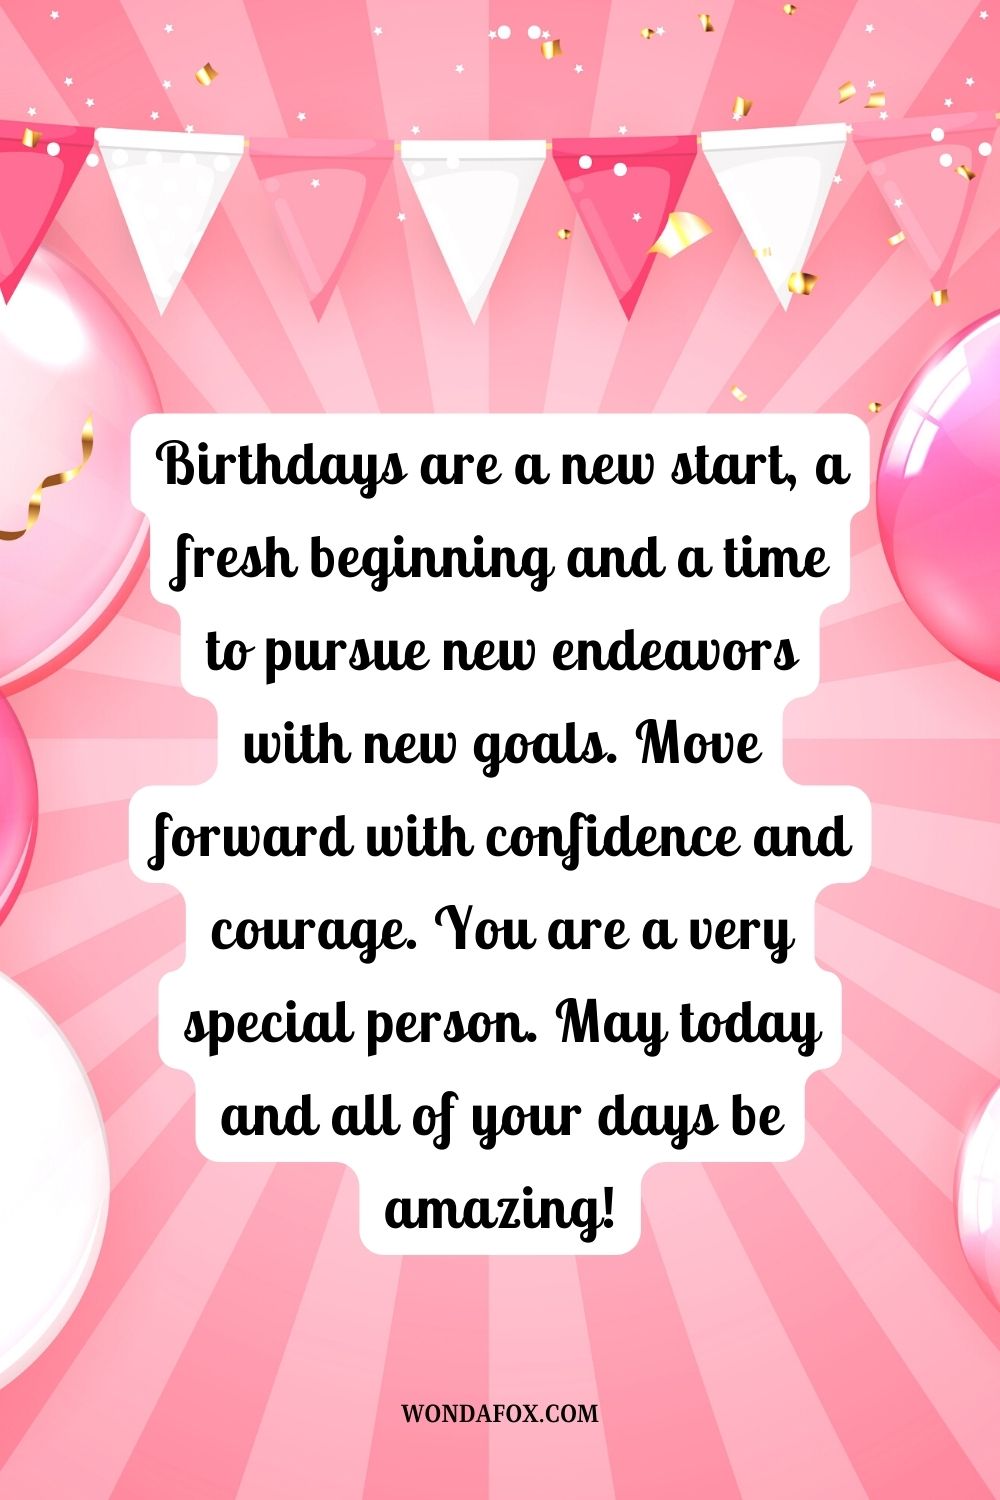 “Birthdays are a new start, a fresh beginning and a time to pursue new endeavors with new goals. Move forward with confidence and courage. You are a very special person. May today and all of your days be amazing!”